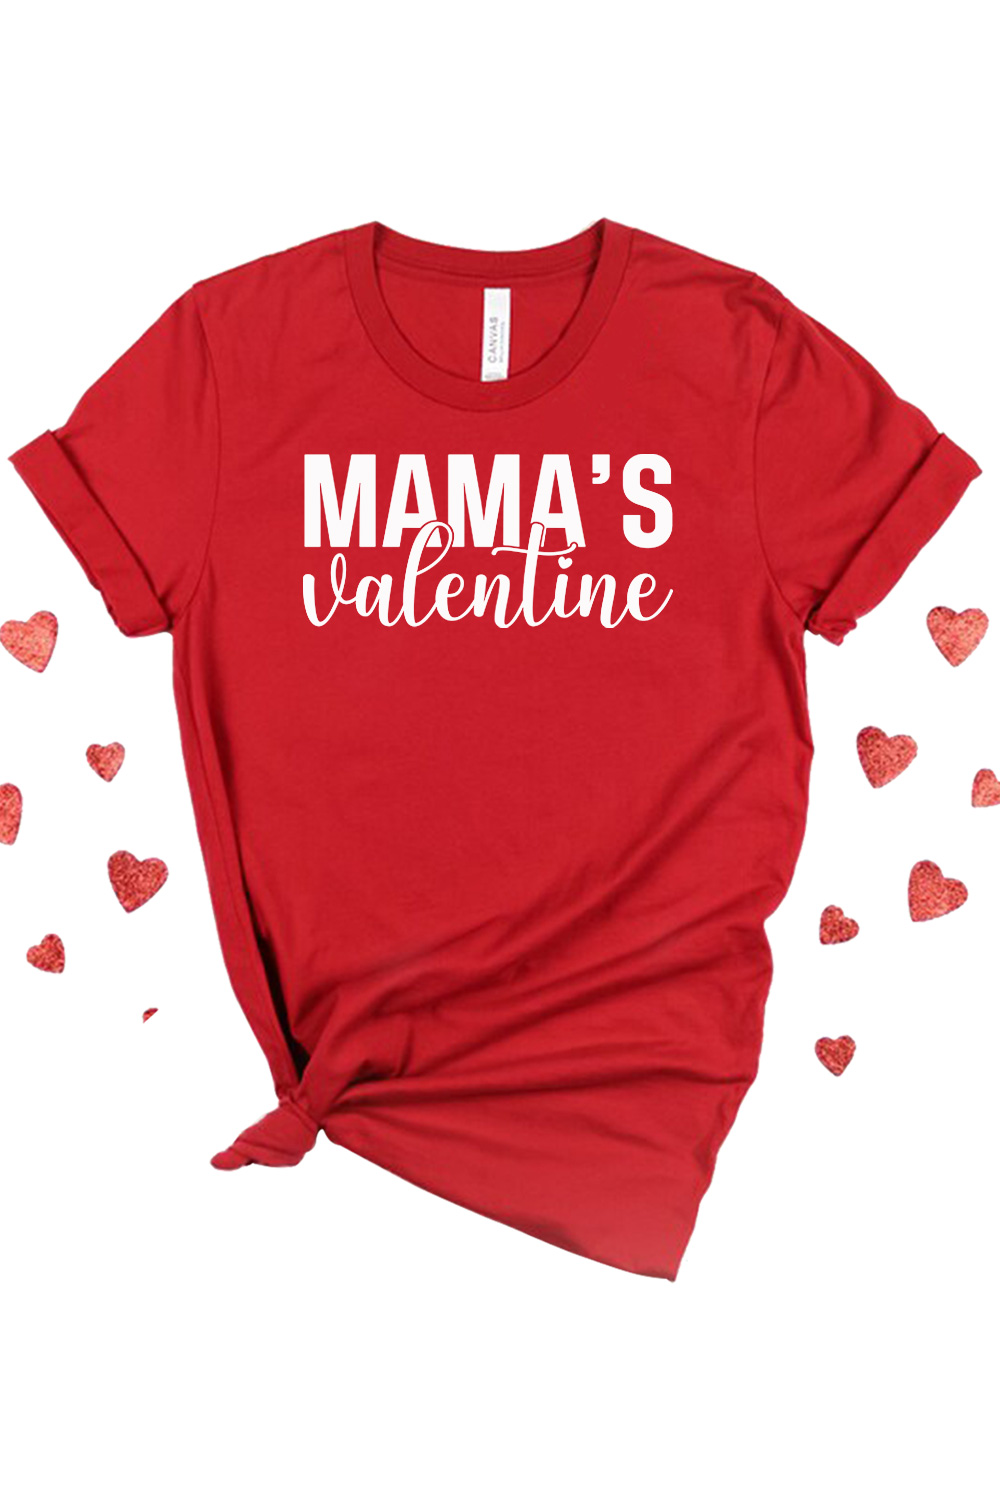 Image of a T-shirt with a wonderful inscription Mamas Valentine